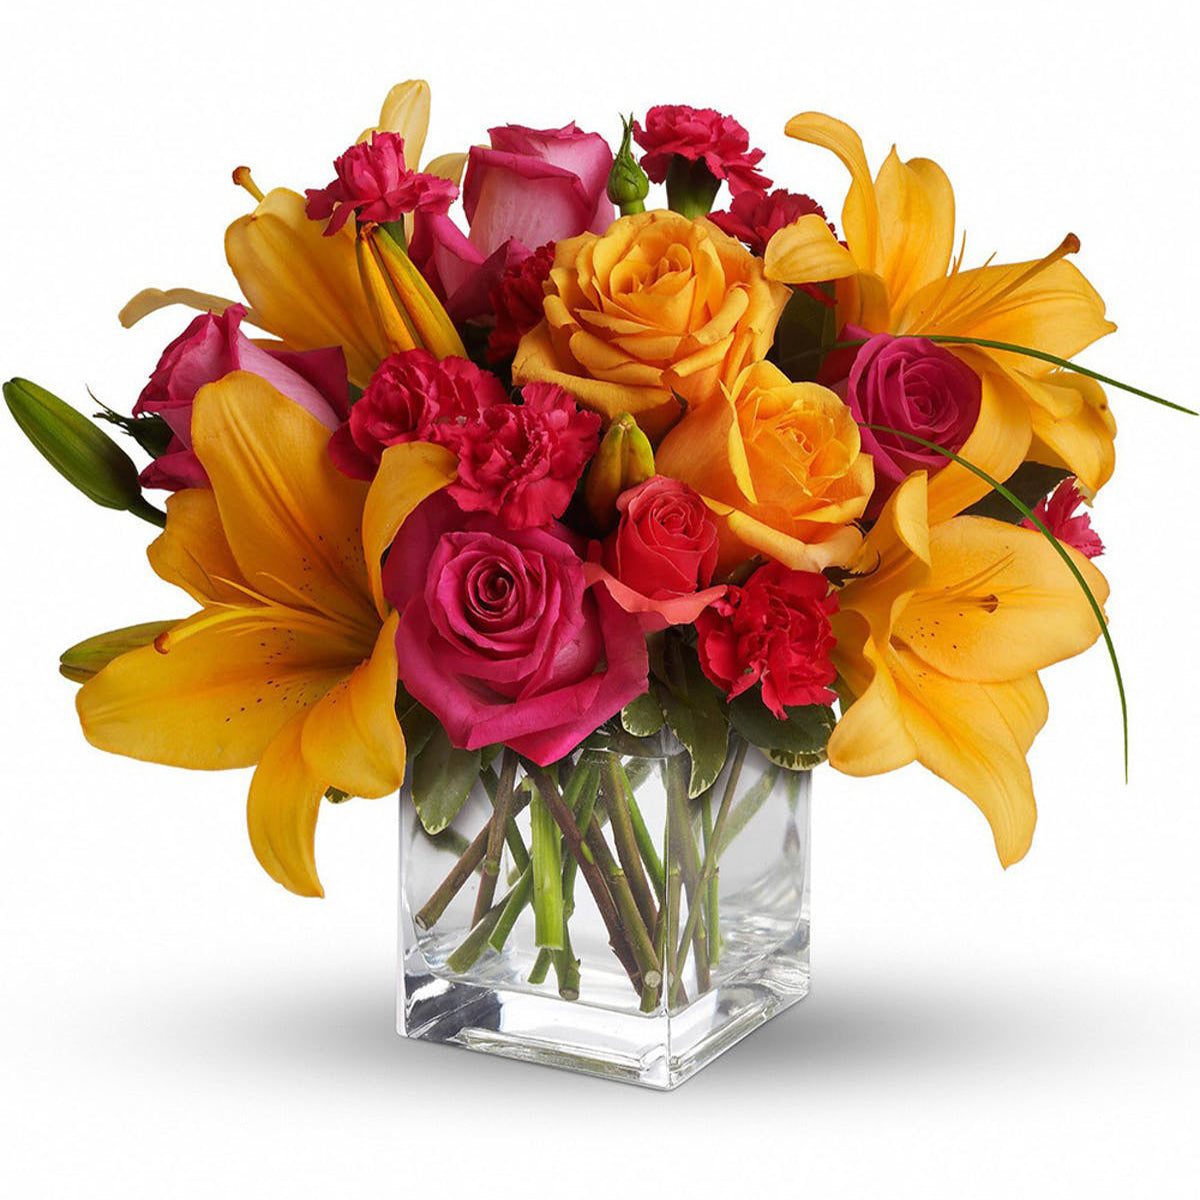 Uniquely Chic - Mixed Flowers In a Glass Vase